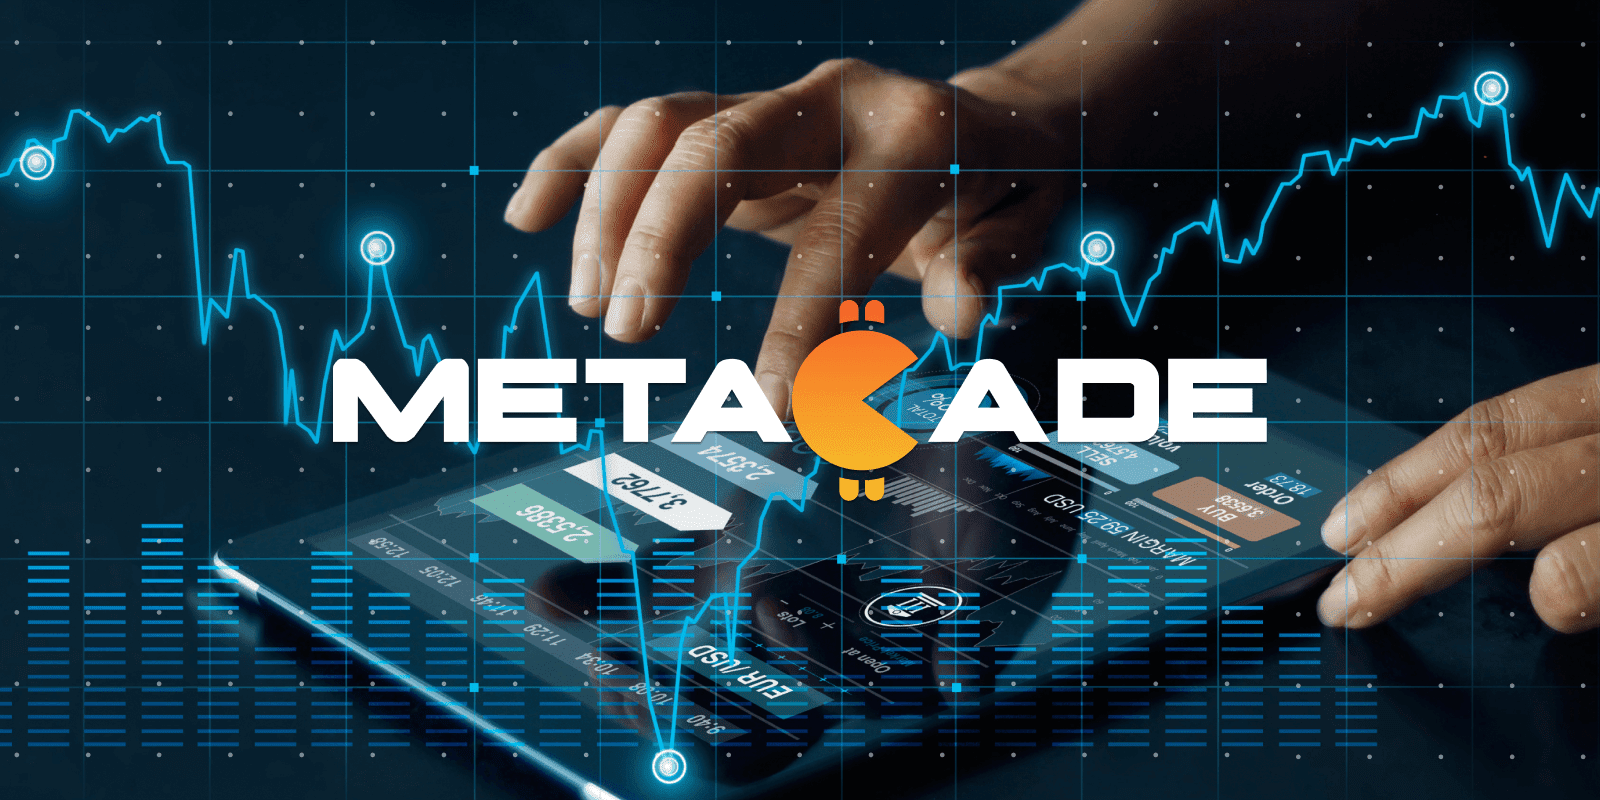 Metacade Crypto Presale - What You Need To Know Before You Invest